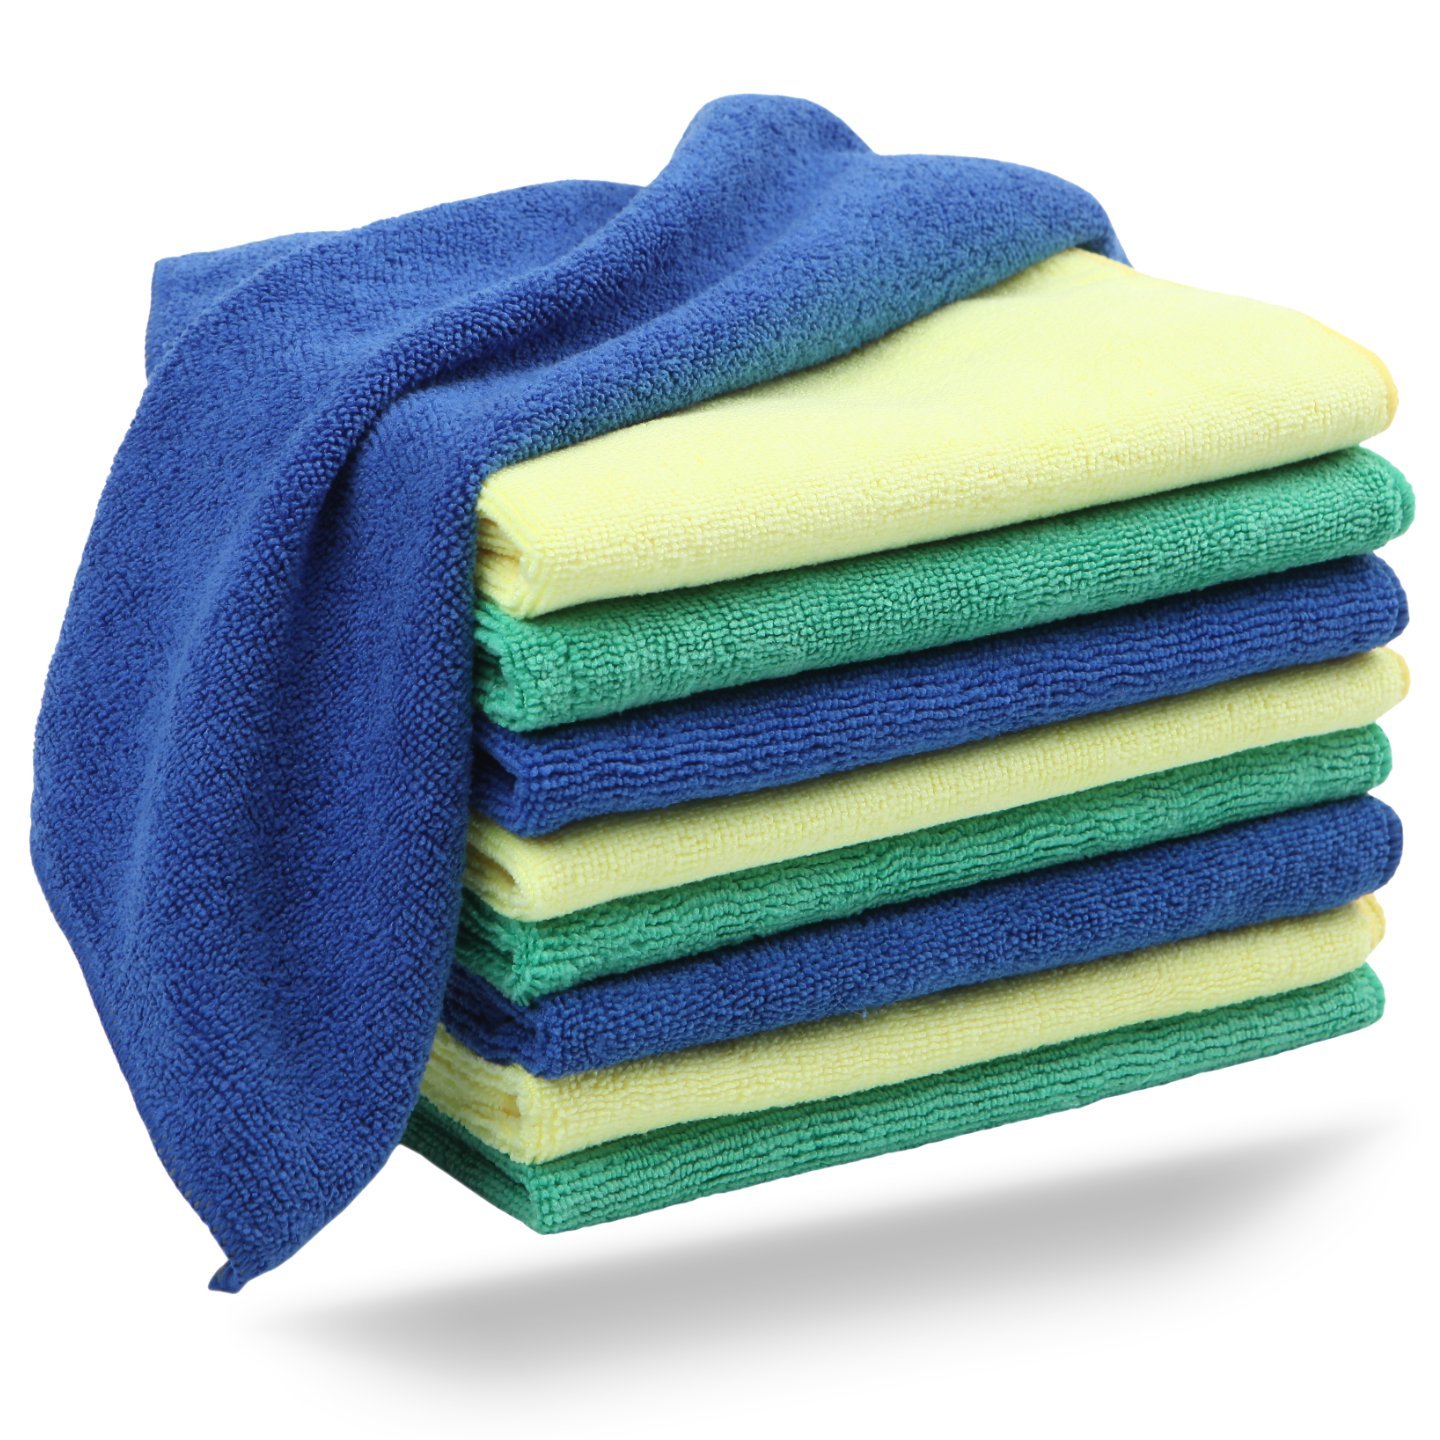 5 Best Microfiber Cleaning Cloth – Breeze through your cleaning tasks ...